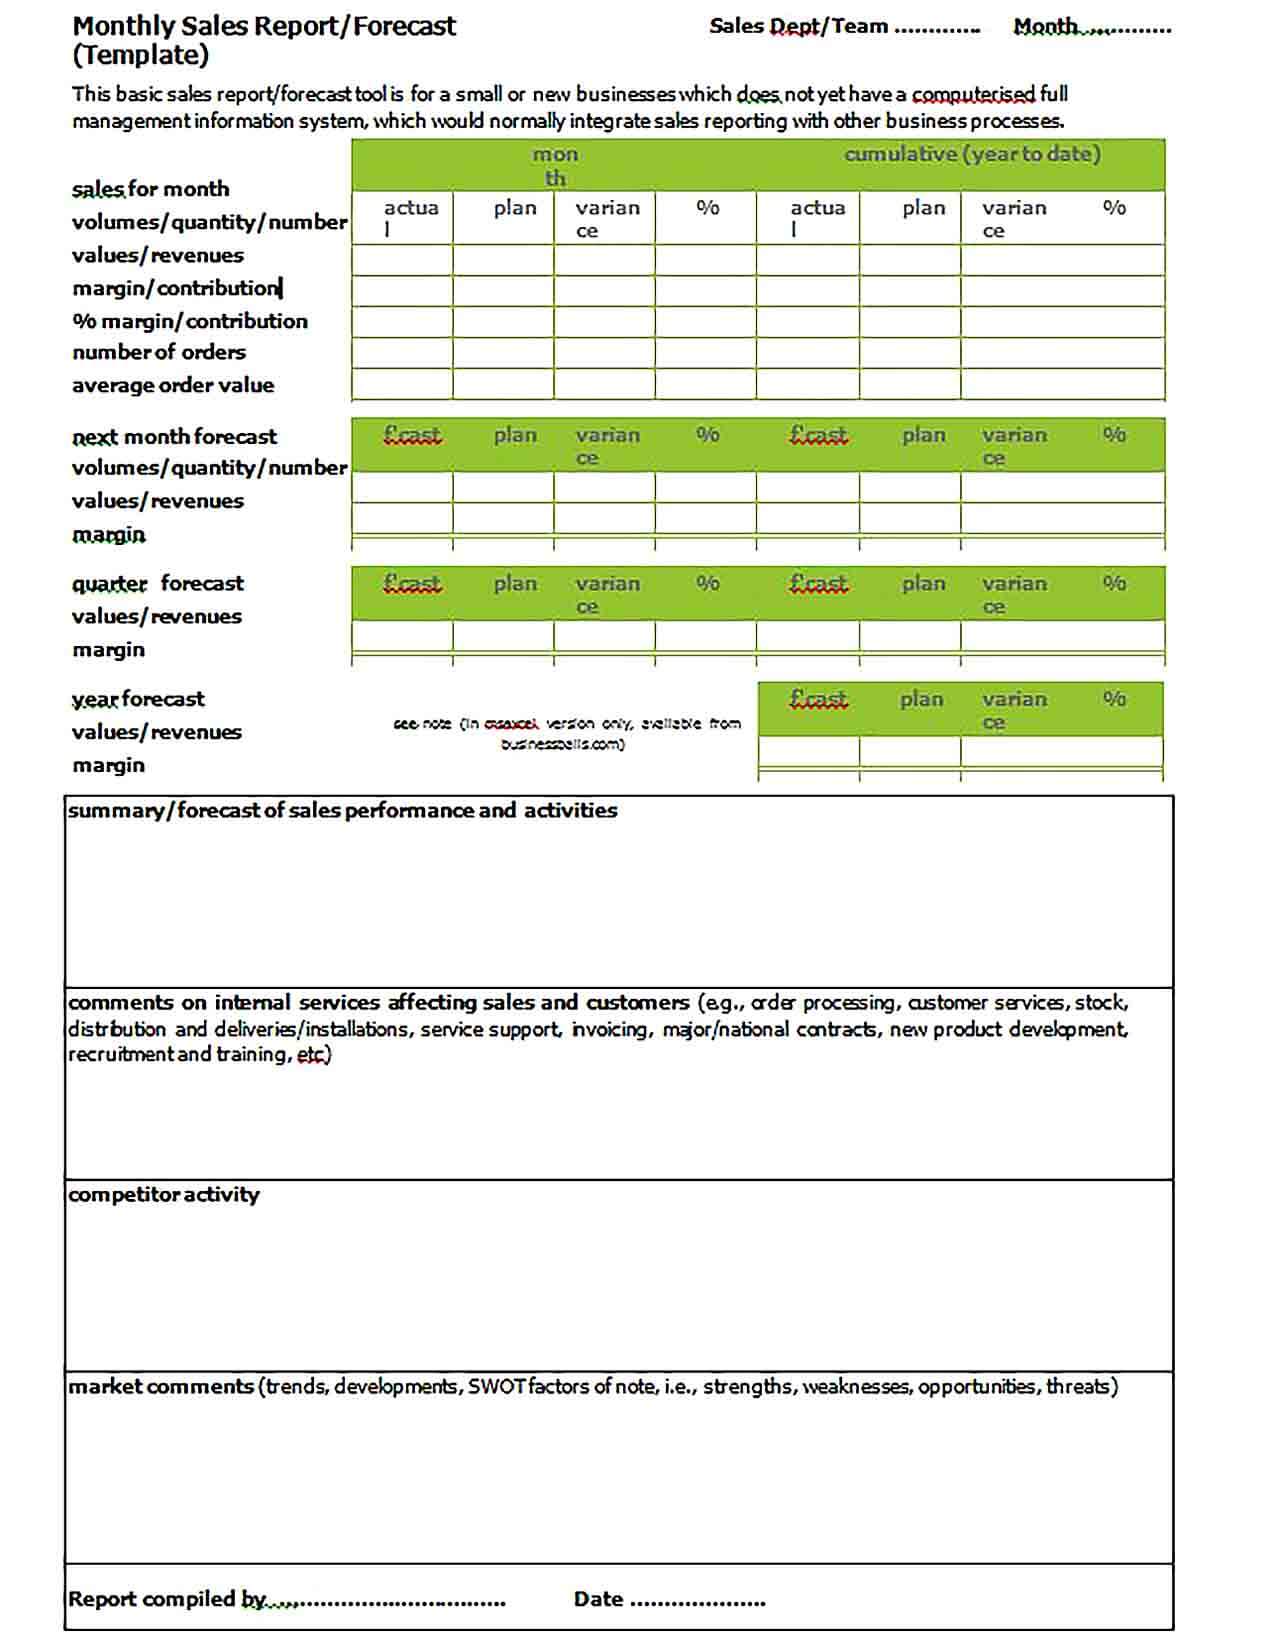 Sample monthly sales report Template